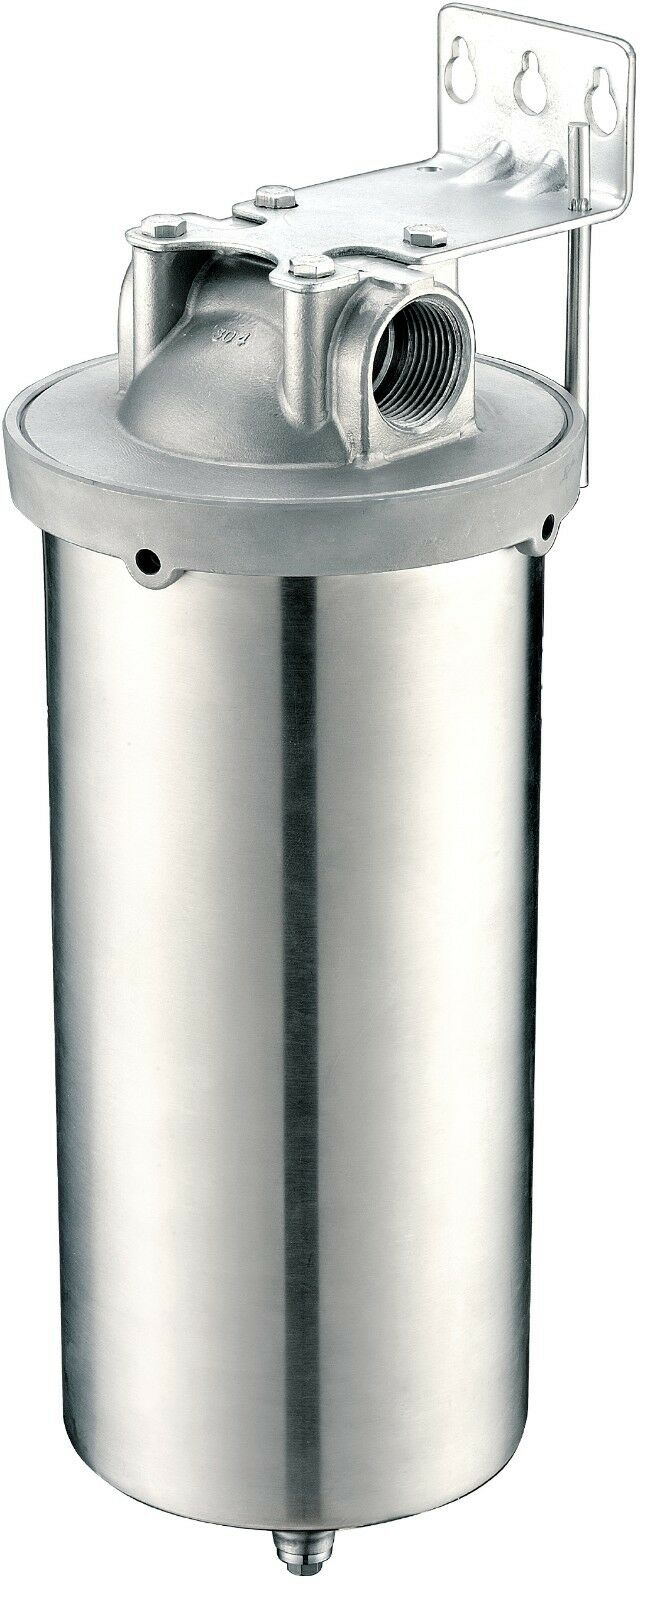 Stainless Steel Water Filter Housing for 10"L cartridges 1"NPT Hydro-Genics